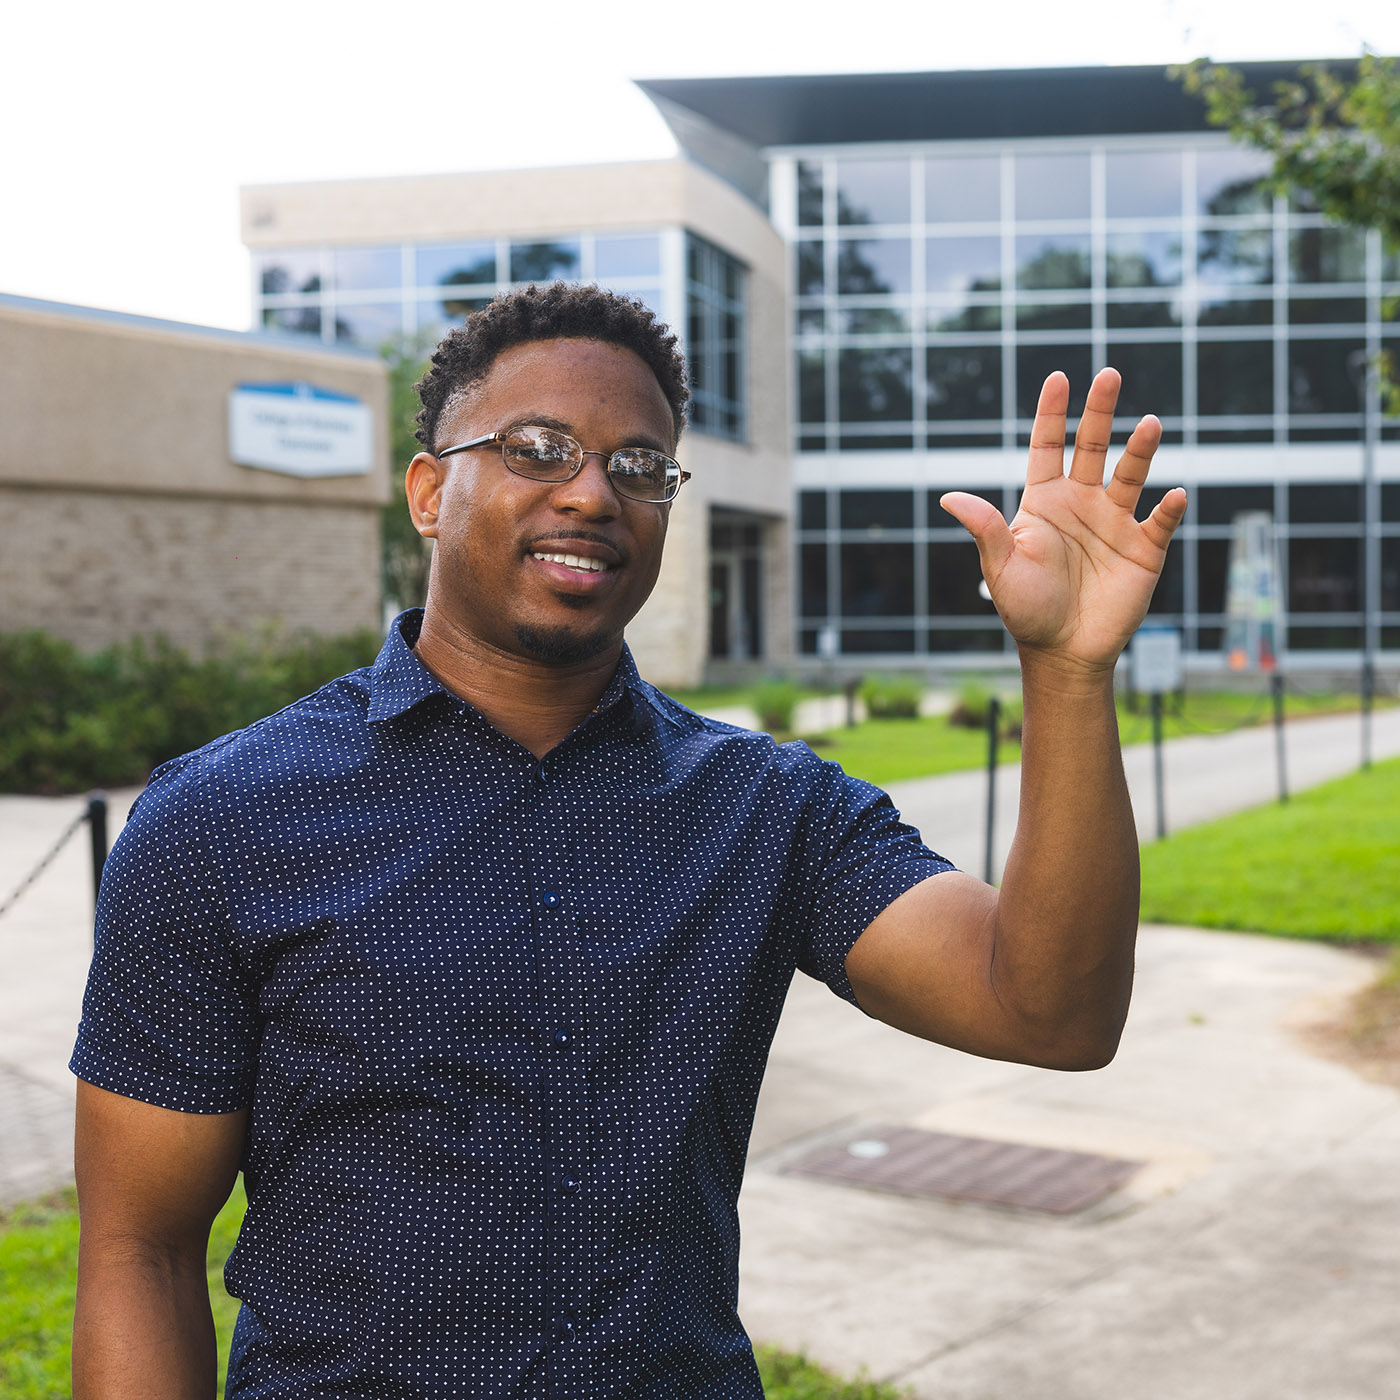 Nate Benton, Jr., smiles and waves while standing outdoors at UWF.